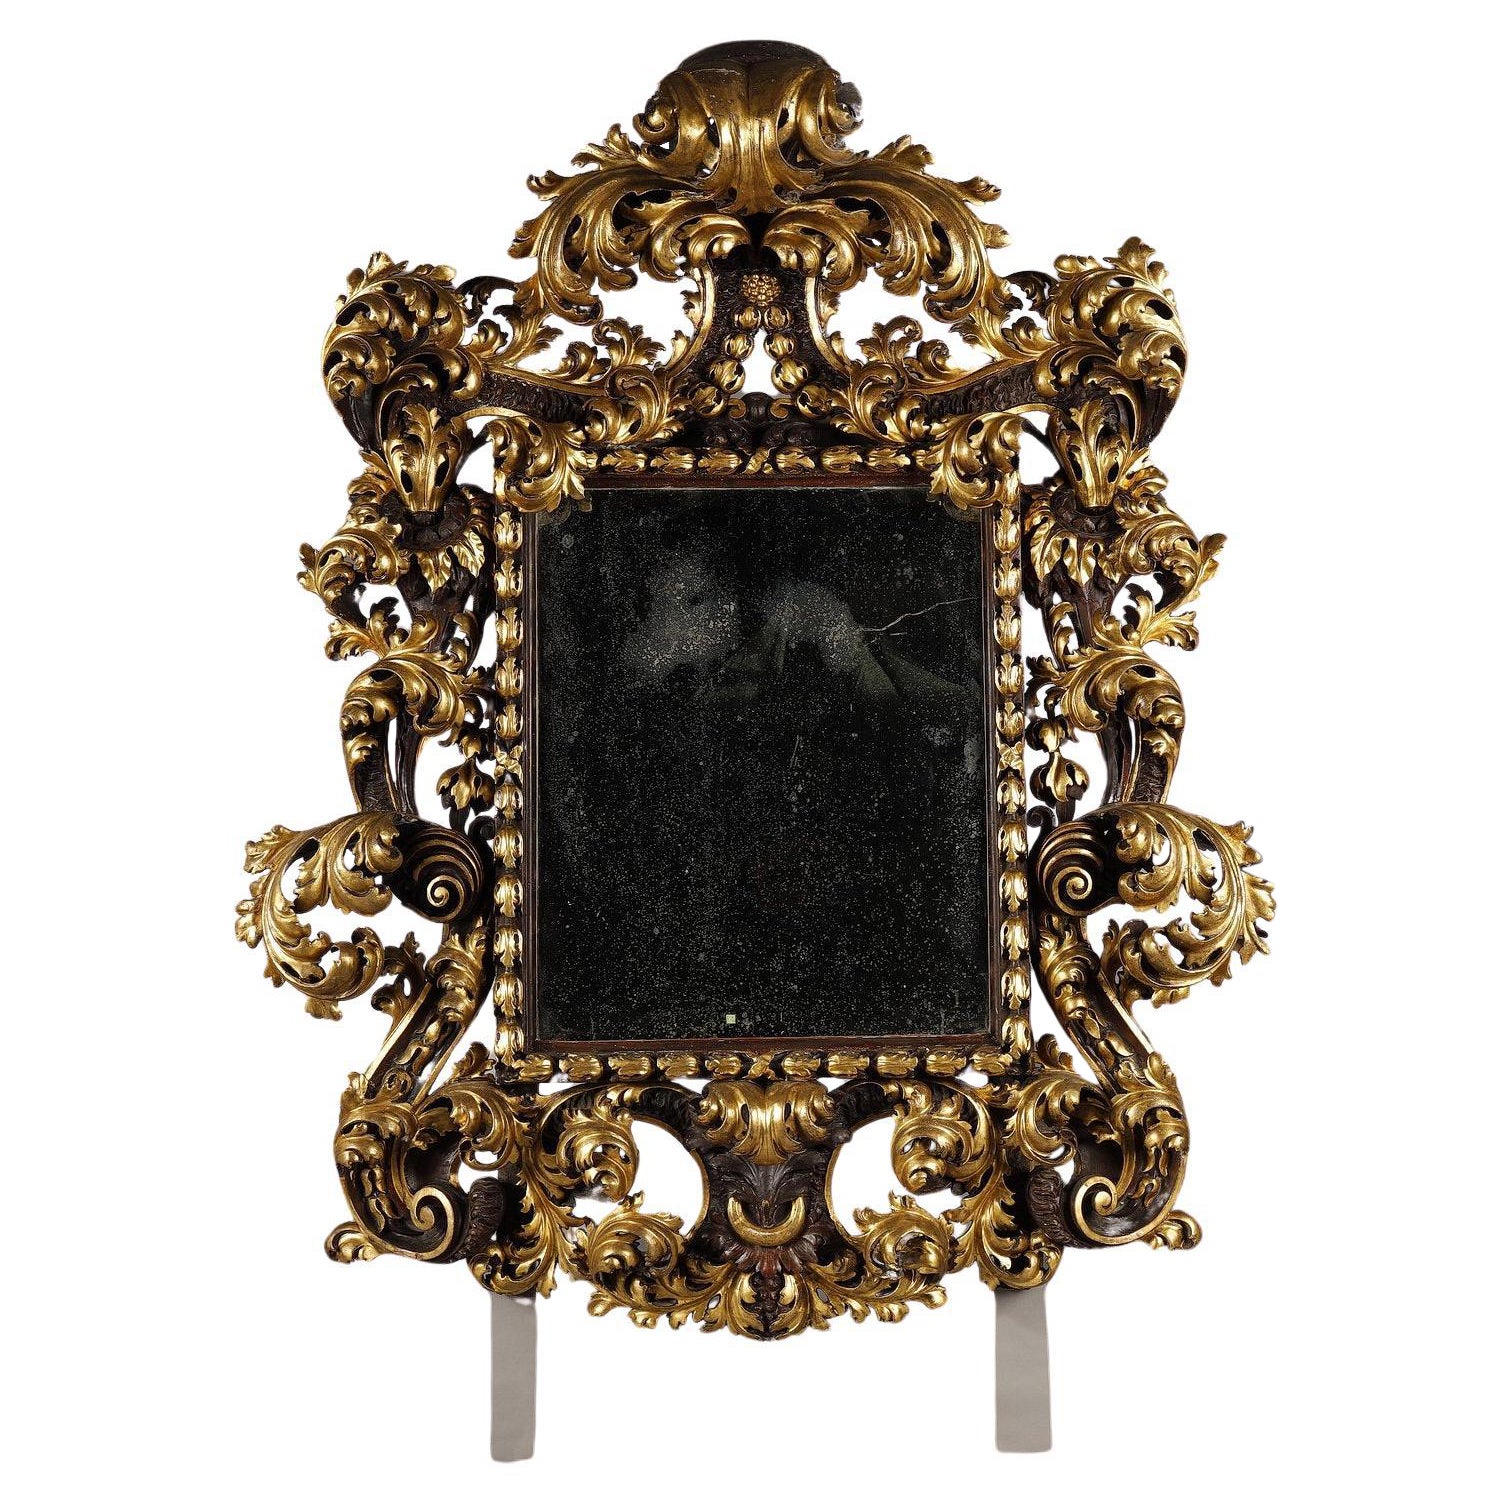 Vary large Roman Baroque Mirror frame For Sale